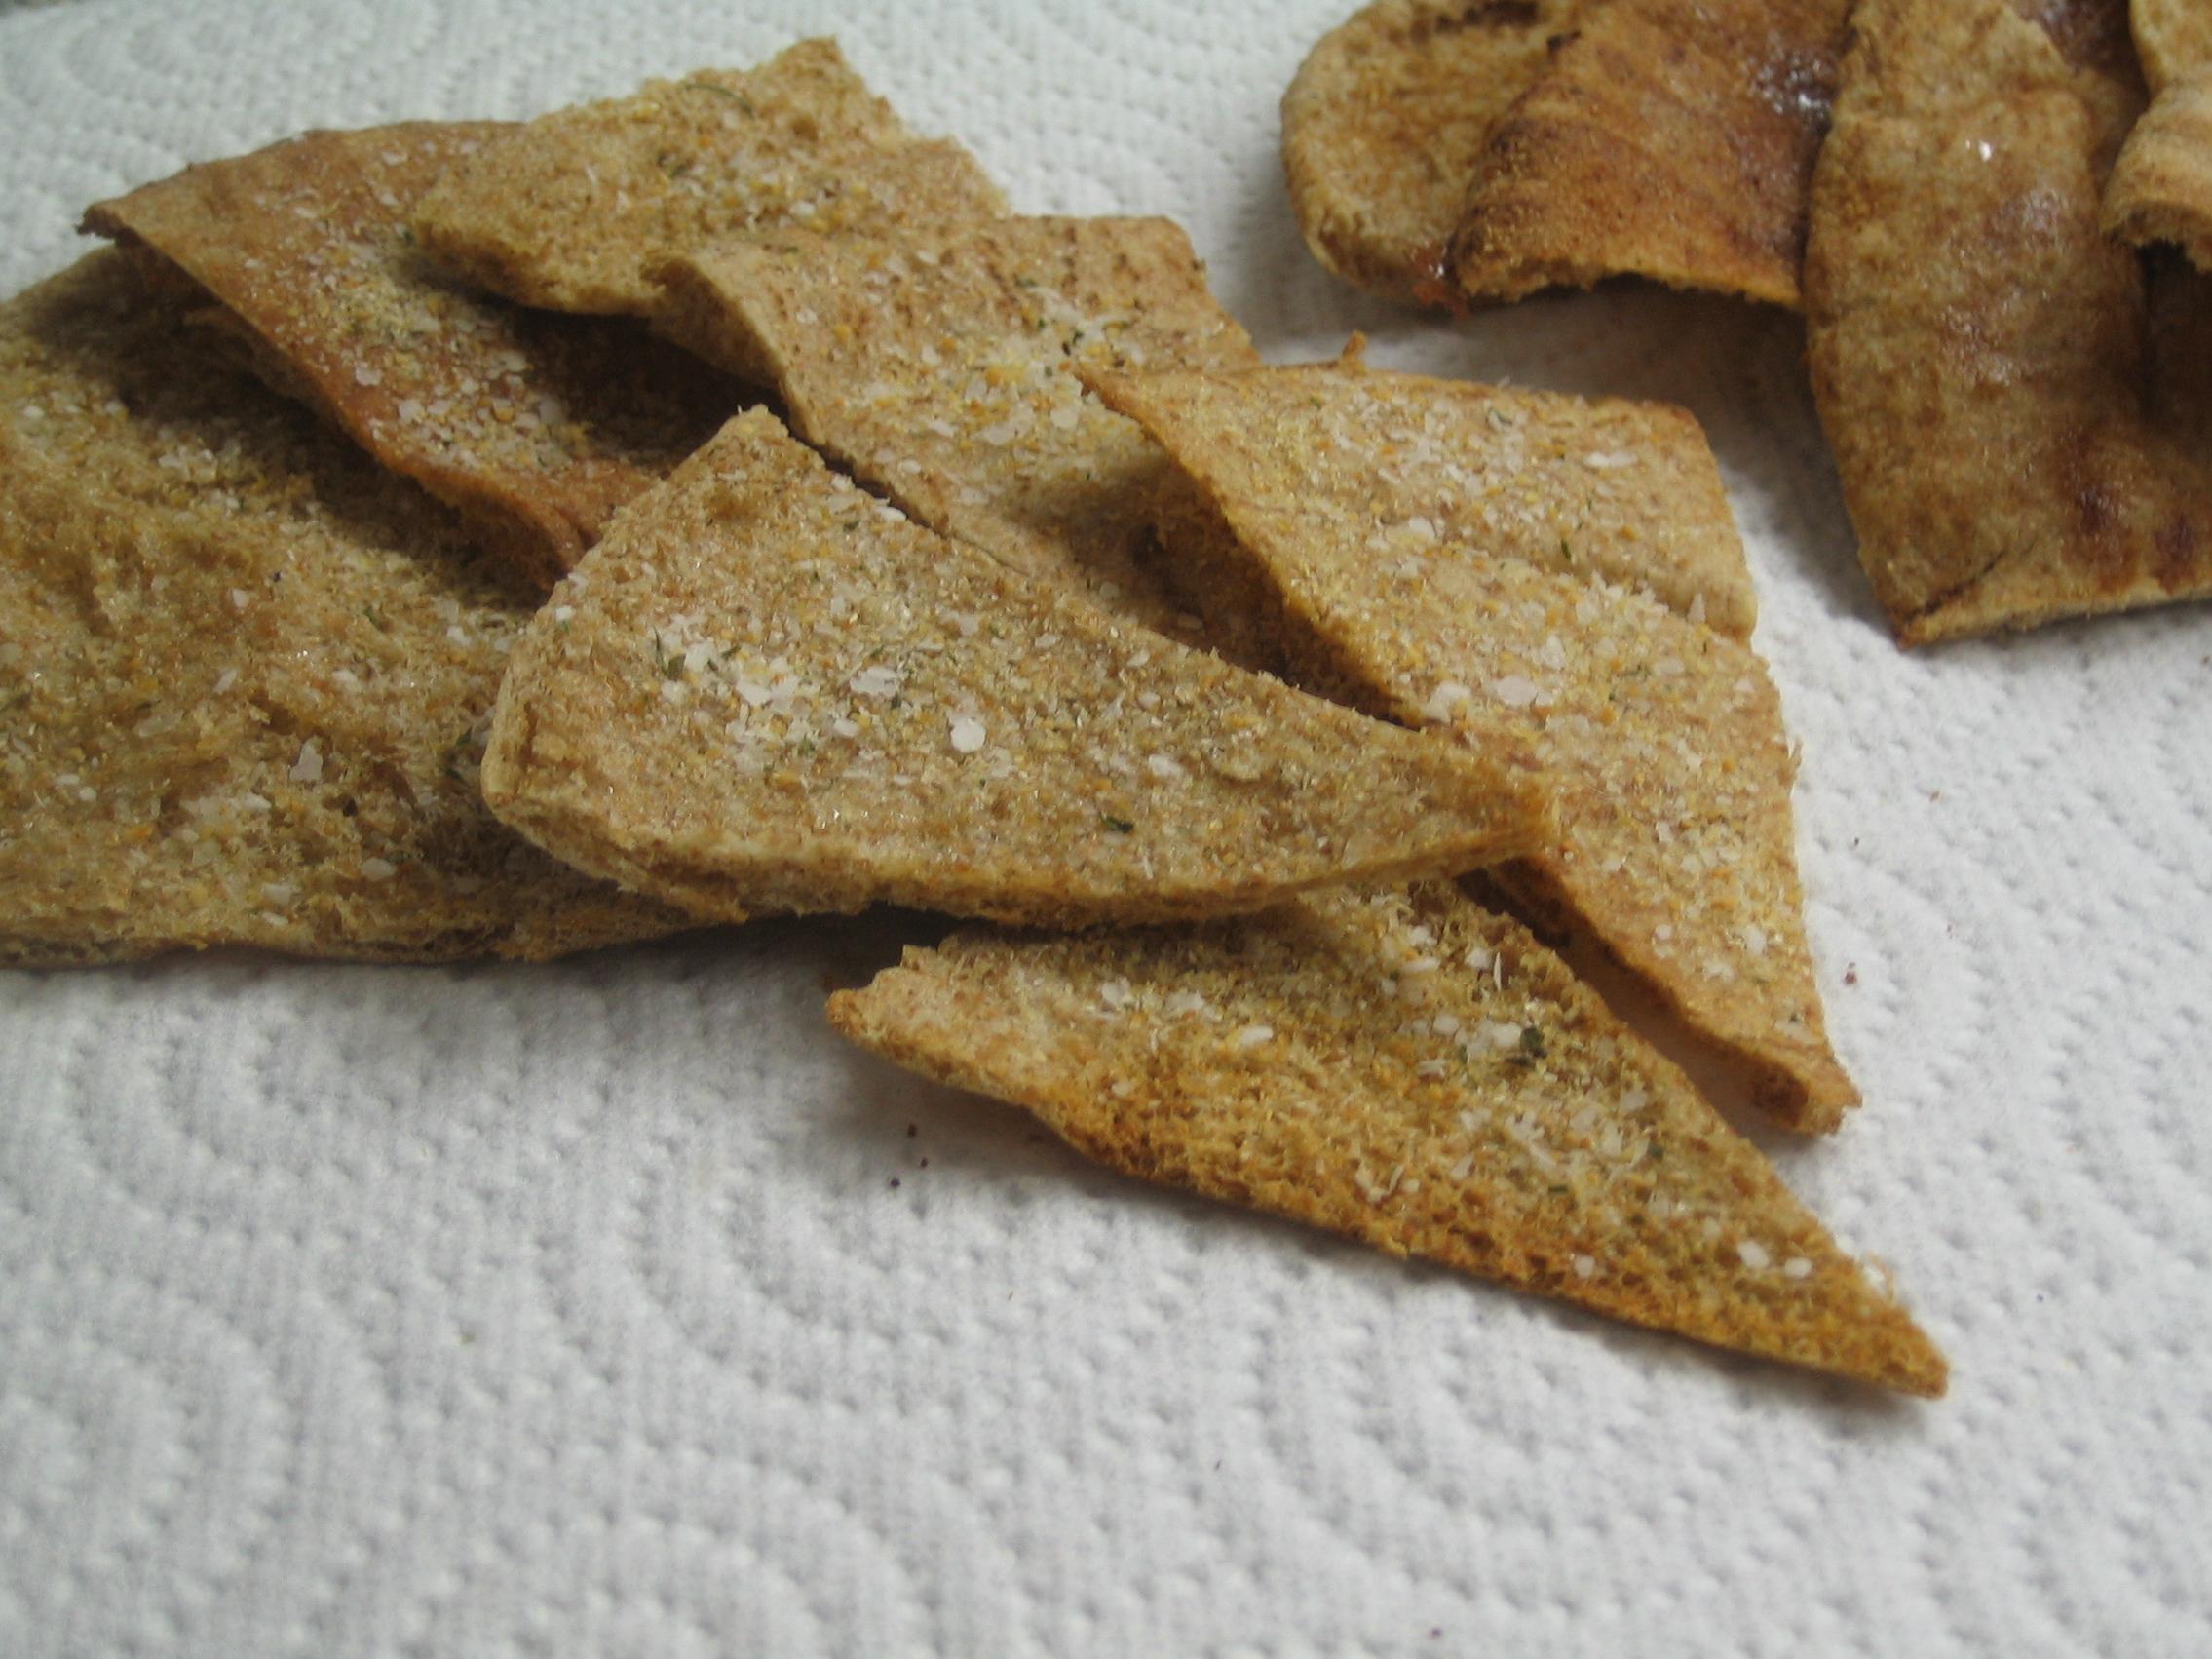  Watch your favorite movie with a bowl of these crunchy pita chips